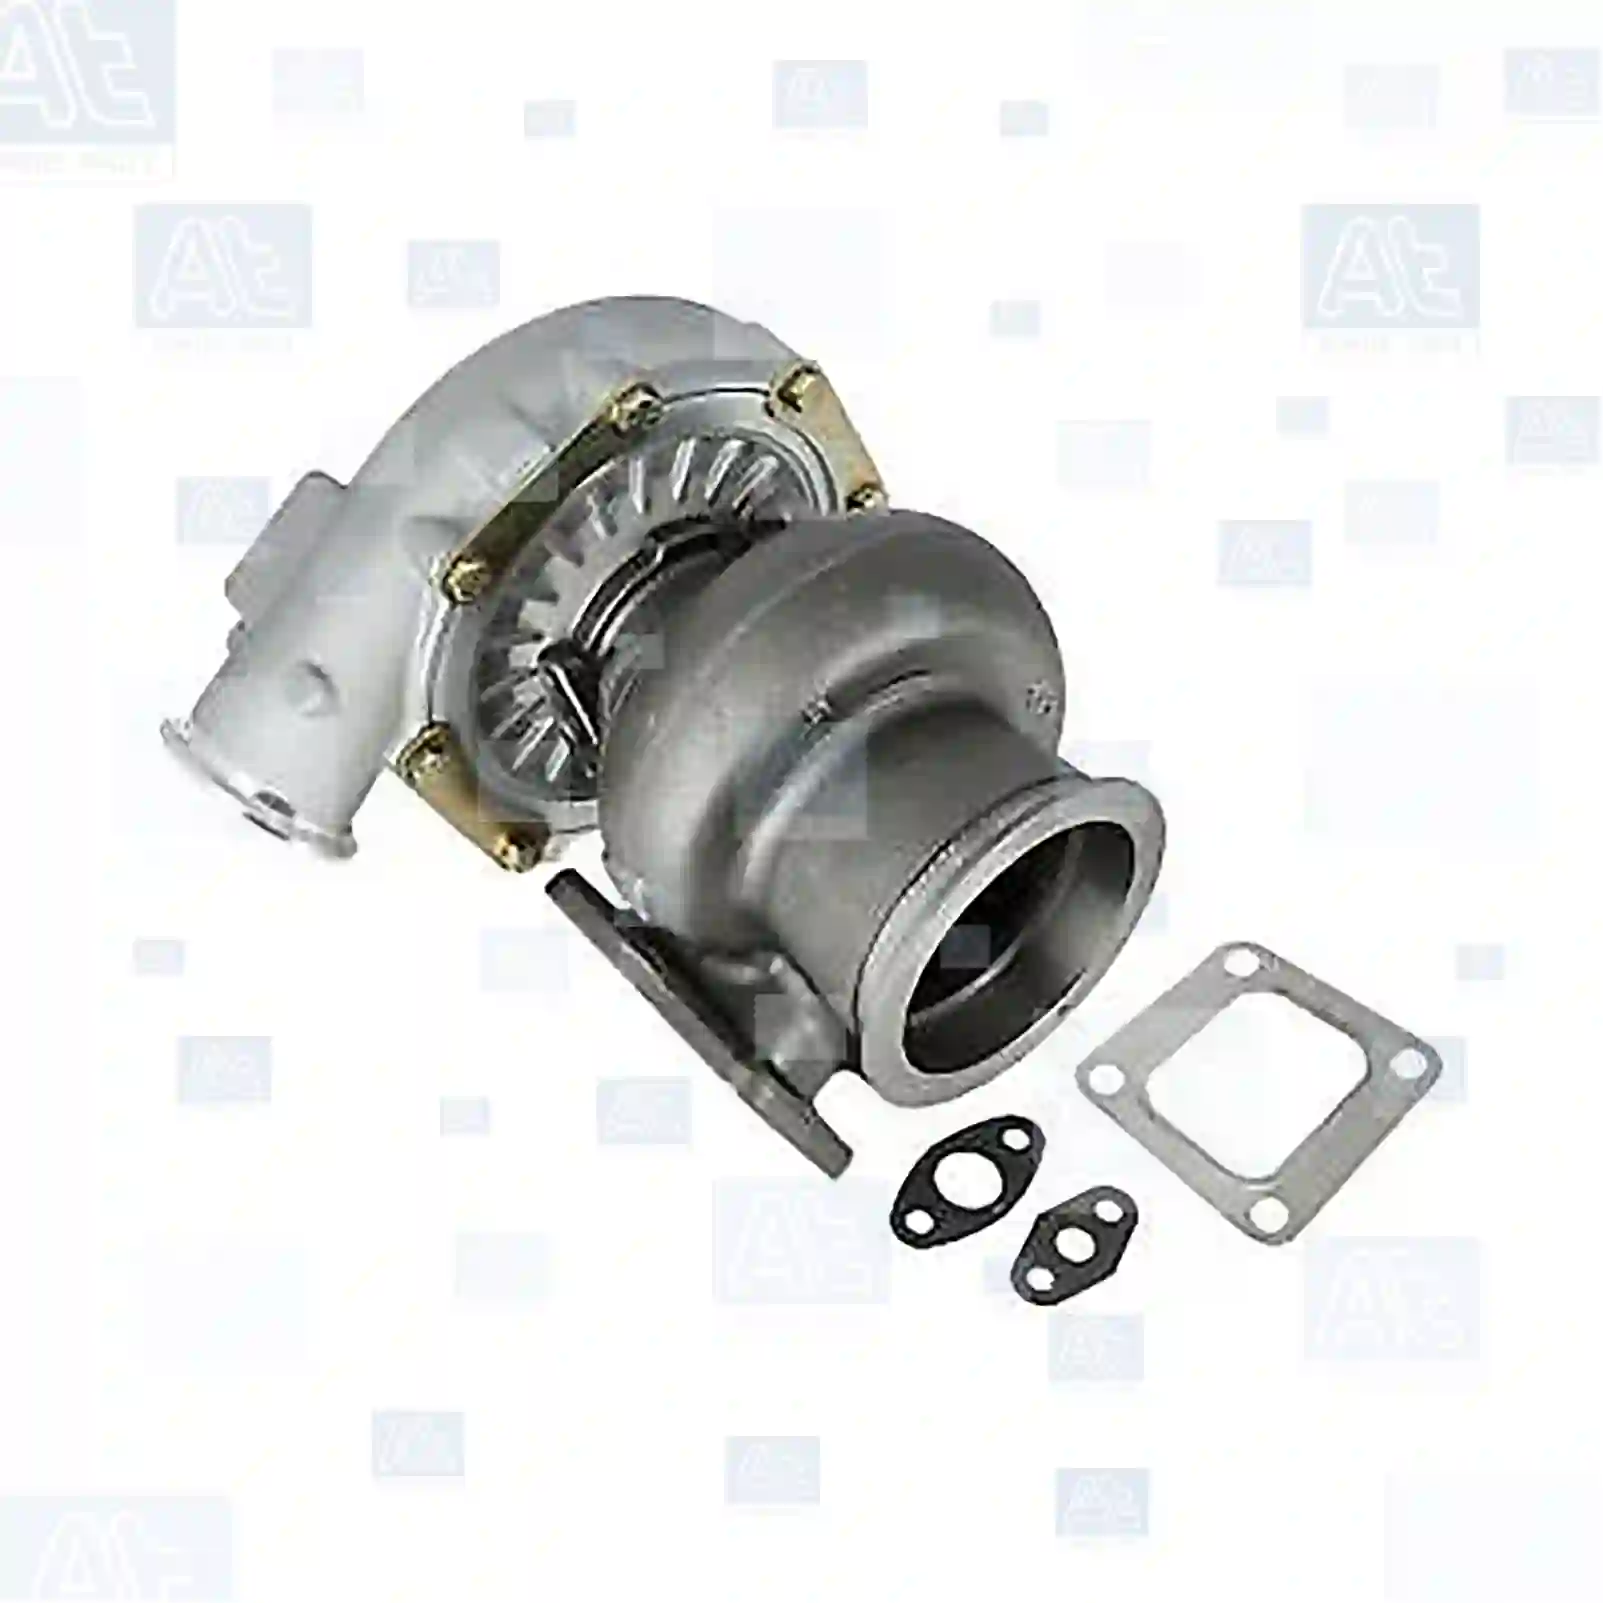 Turbocharger, with gasket kit, 77700403, 10571491, 10571532, 10571693, 10571695, 10571713, 10571715, 10572774, 10572776, 1372846, 1380095, 1380097, 1382085, 1400412, 1400413, 1405660, 1405666, 1405667, 1423021, 1430805, 1430806, 1501547, 1501641, 1501642, 1501646, 1501647, 1524872, 1524873, 1524876, 1524877, 1571489, 1571491, 1571531, 1571532, 1571693, 1571695, 1571715, 1776559, 1776560, 1776561, 1776562, 501641, 501646, 524872, 524876, 571489, 571491, 571531, 571532, 571693, 571695, 571715, ZG02208-0008 ||  77700403 At Spare Part | Engine, Accelerator Pedal, Camshaft, Connecting Rod, Crankcase, Crankshaft, Cylinder Head, Engine Suspension Mountings, Exhaust Manifold, Exhaust Gas Recirculation, Filter Kits, Flywheel Housing, General Overhaul Kits, Engine, Intake Manifold, Oil Cleaner, Oil Cooler, Oil Filter, Oil Pump, Oil Sump, Piston & Liner, Sensor & Switch, Timing Case, Turbocharger, Cooling System, Belt Tensioner, Coolant Filter, Coolant Pipe, Corrosion Prevention Agent, Drive, Expansion Tank, Fan, Intercooler, Monitors & Gauges, Radiator, Thermostat, V-Belt / Timing belt, Water Pump, Fuel System, Electronical Injector Unit, Feed Pump, Fuel Filter, cpl., Fuel Gauge Sender,  Fuel Line, Fuel Pump, Fuel Tank, Injection Line Kit, Injection Pump, Exhaust System, Clutch & Pedal, Gearbox, Propeller Shaft, Axles, Brake System, Hubs & Wheels, Suspension, Leaf Spring, Universal Parts / Accessories, Steering, Electrical System, Cabin Turbocharger, with gasket kit, 77700403, 10571491, 10571532, 10571693, 10571695, 10571713, 10571715, 10572774, 10572776, 1372846, 1380095, 1380097, 1382085, 1400412, 1400413, 1405660, 1405666, 1405667, 1423021, 1430805, 1430806, 1501547, 1501641, 1501642, 1501646, 1501647, 1524872, 1524873, 1524876, 1524877, 1571489, 1571491, 1571531, 1571532, 1571693, 1571695, 1571715, 1776559, 1776560, 1776561, 1776562, 501641, 501646, 524872, 524876, 571489, 571491, 571531, 571532, 571693, 571695, 571715, ZG02208-0008 ||  77700403 At Spare Part | Engine, Accelerator Pedal, Camshaft, Connecting Rod, Crankcase, Crankshaft, Cylinder Head, Engine Suspension Mountings, Exhaust Manifold, Exhaust Gas Recirculation, Filter Kits, Flywheel Housing, General Overhaul Kits, Engine, Intake Manifold, Oil Cleaner, Oil Cooler, Oil Filter, Oil Pump, Oil Sump, Piston & Liner, Sensor & Switch, Timing Case, Turbocharger, Cooling System, Belt Tensioner, Coolant Filter, Coolant Pipe, Corrosion Prevention Agent, Drive, Expansion Tank, Fan, Intercooler, Monitors & Gauges, Radiator, Thermostat, V-Belt / Timing belt, Water Pump, Fuel System, Electronical Injector Unit, Feed Pump, Fuel Filter, cpl., Fuel Gauge Sender,  Fuel Line, Fuel Pump, Fuel Tank, Injection Line Kit, Injection Pump, Exhaust System, Clutch & Pedal, Gearbox, Propeller Shaft, Axles, Brake System, Hubs & Wheels, Suspension, Leaf Spring, Universal Parts / Accessories, Steering, Electrical System, Cabin